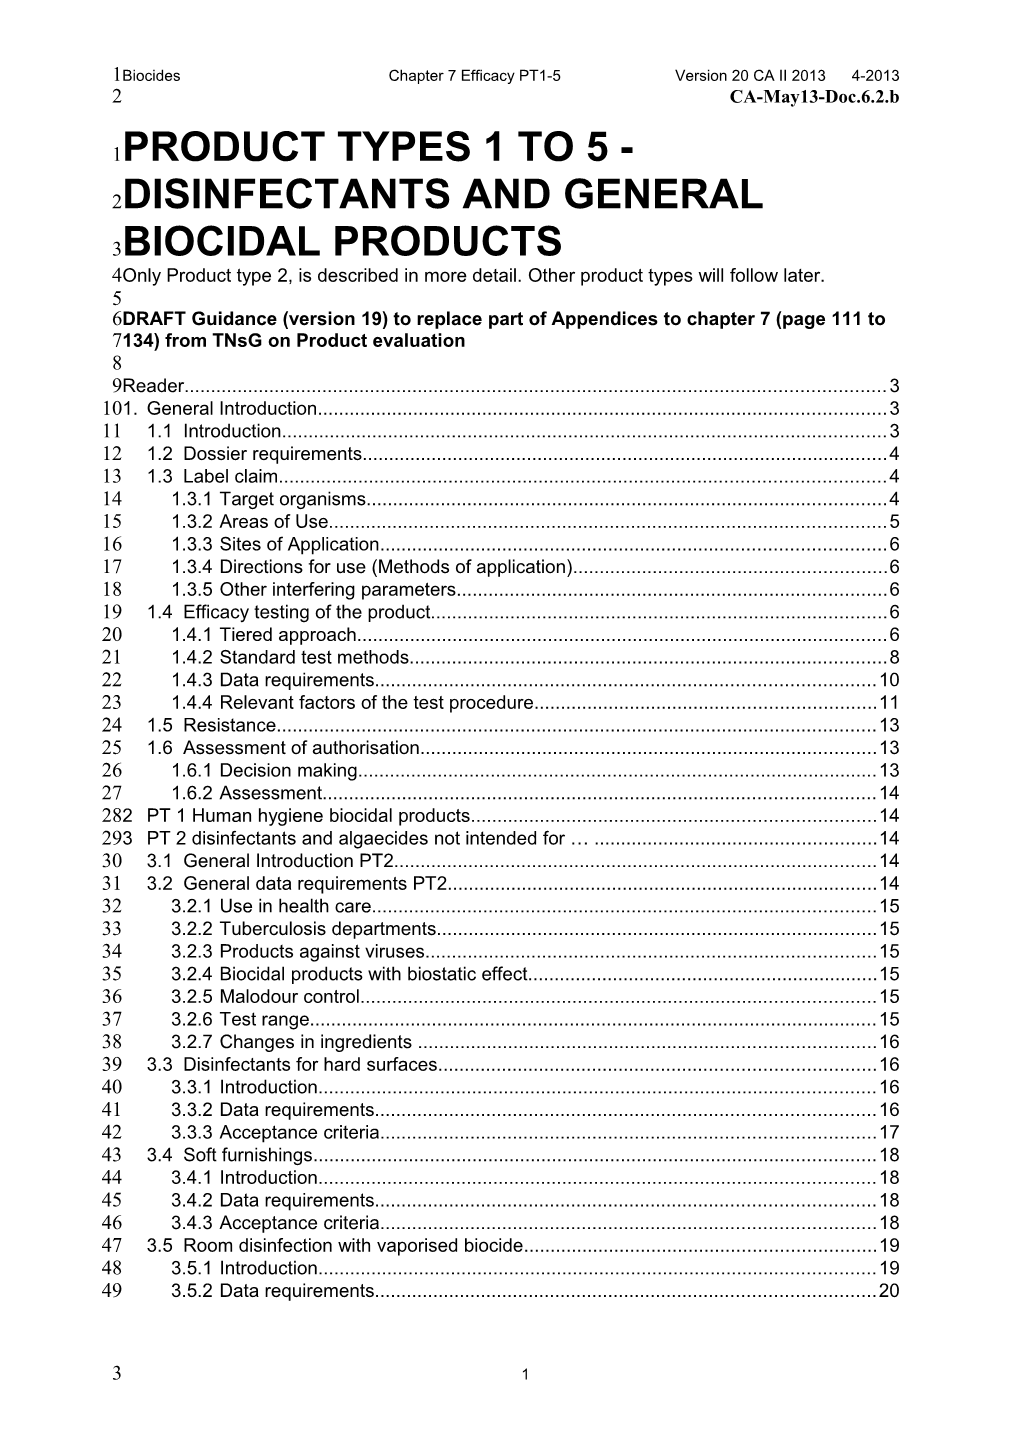 Product Types 1 to 5 - Disinfectants and General Biocidal Products